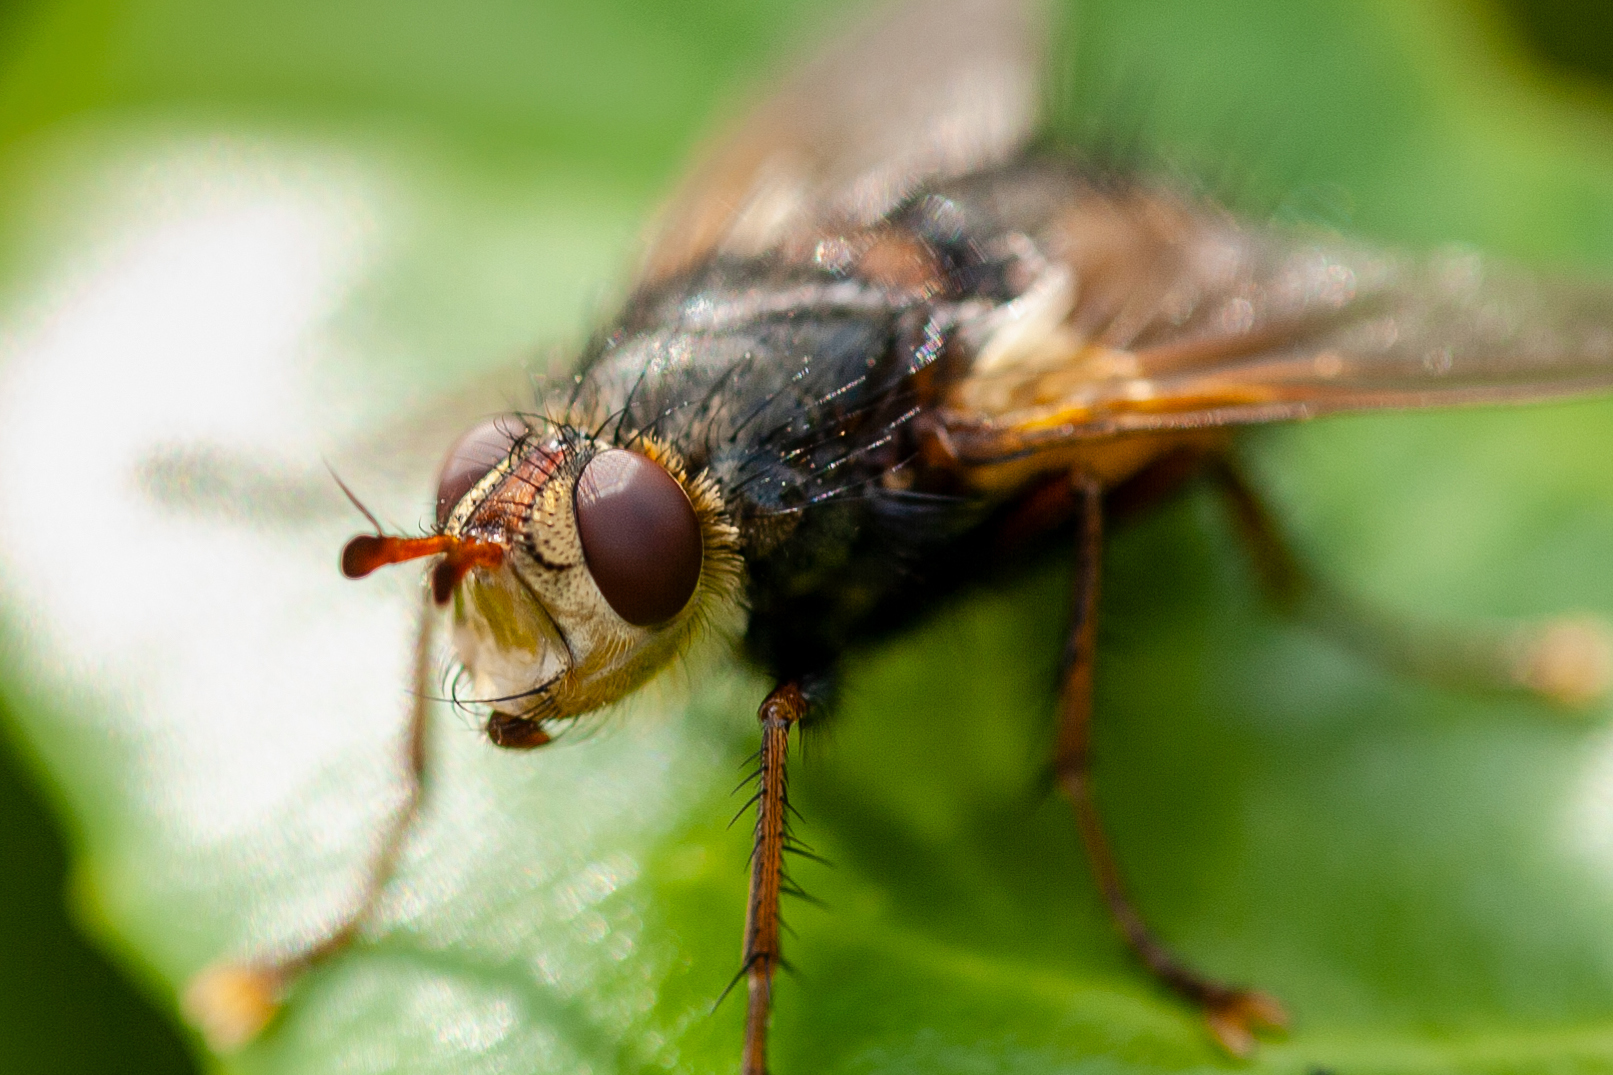 A photo of a fly on a leaf